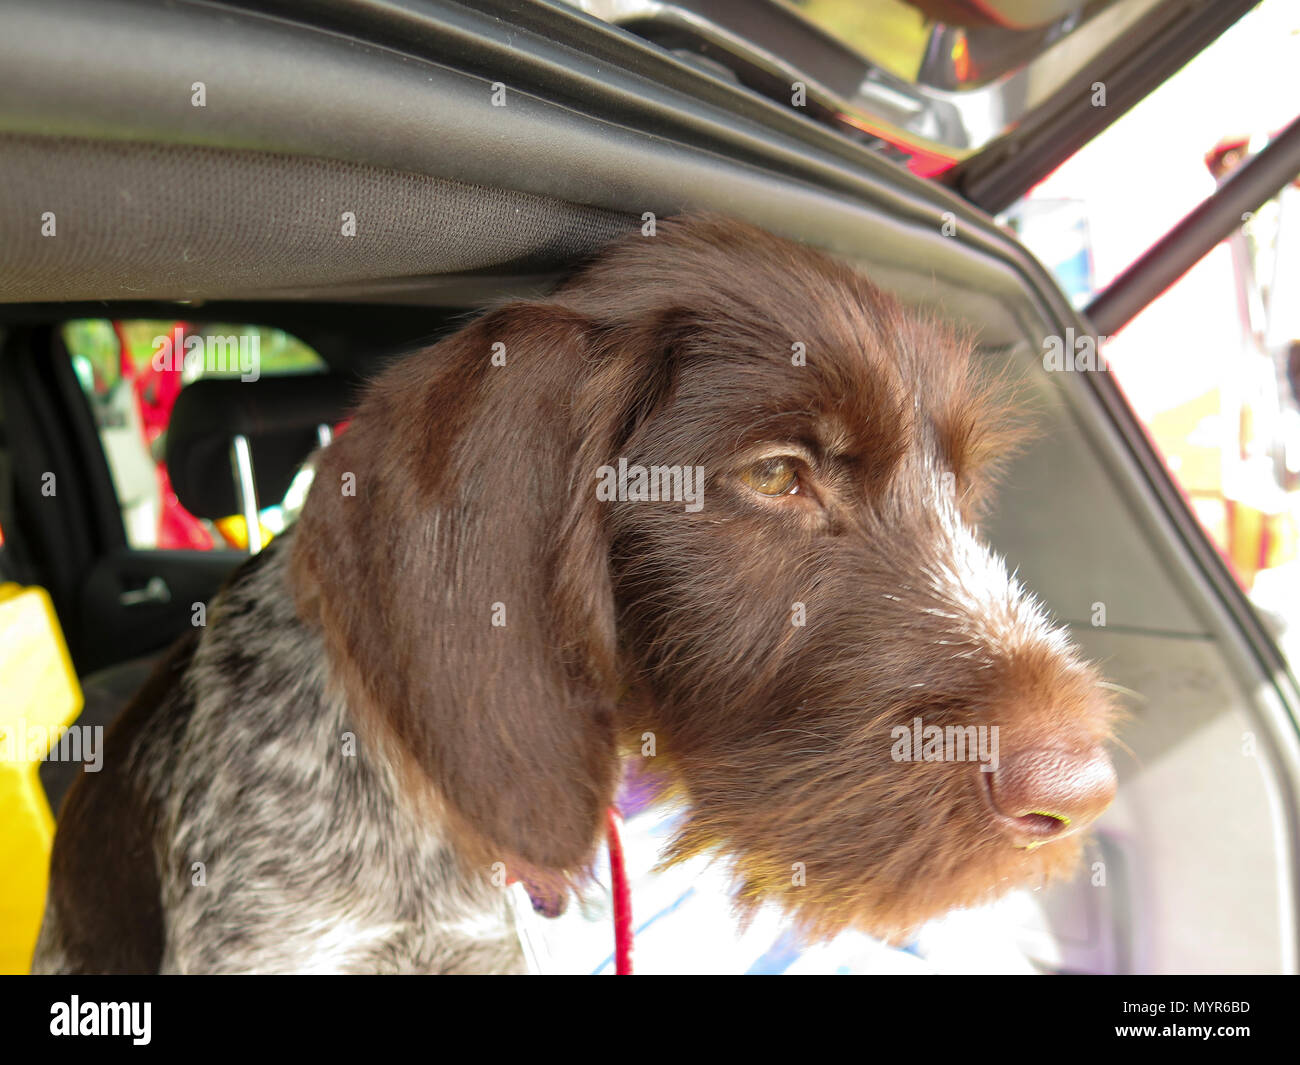 German wire haired pointer puppy in car boot Stock Photo